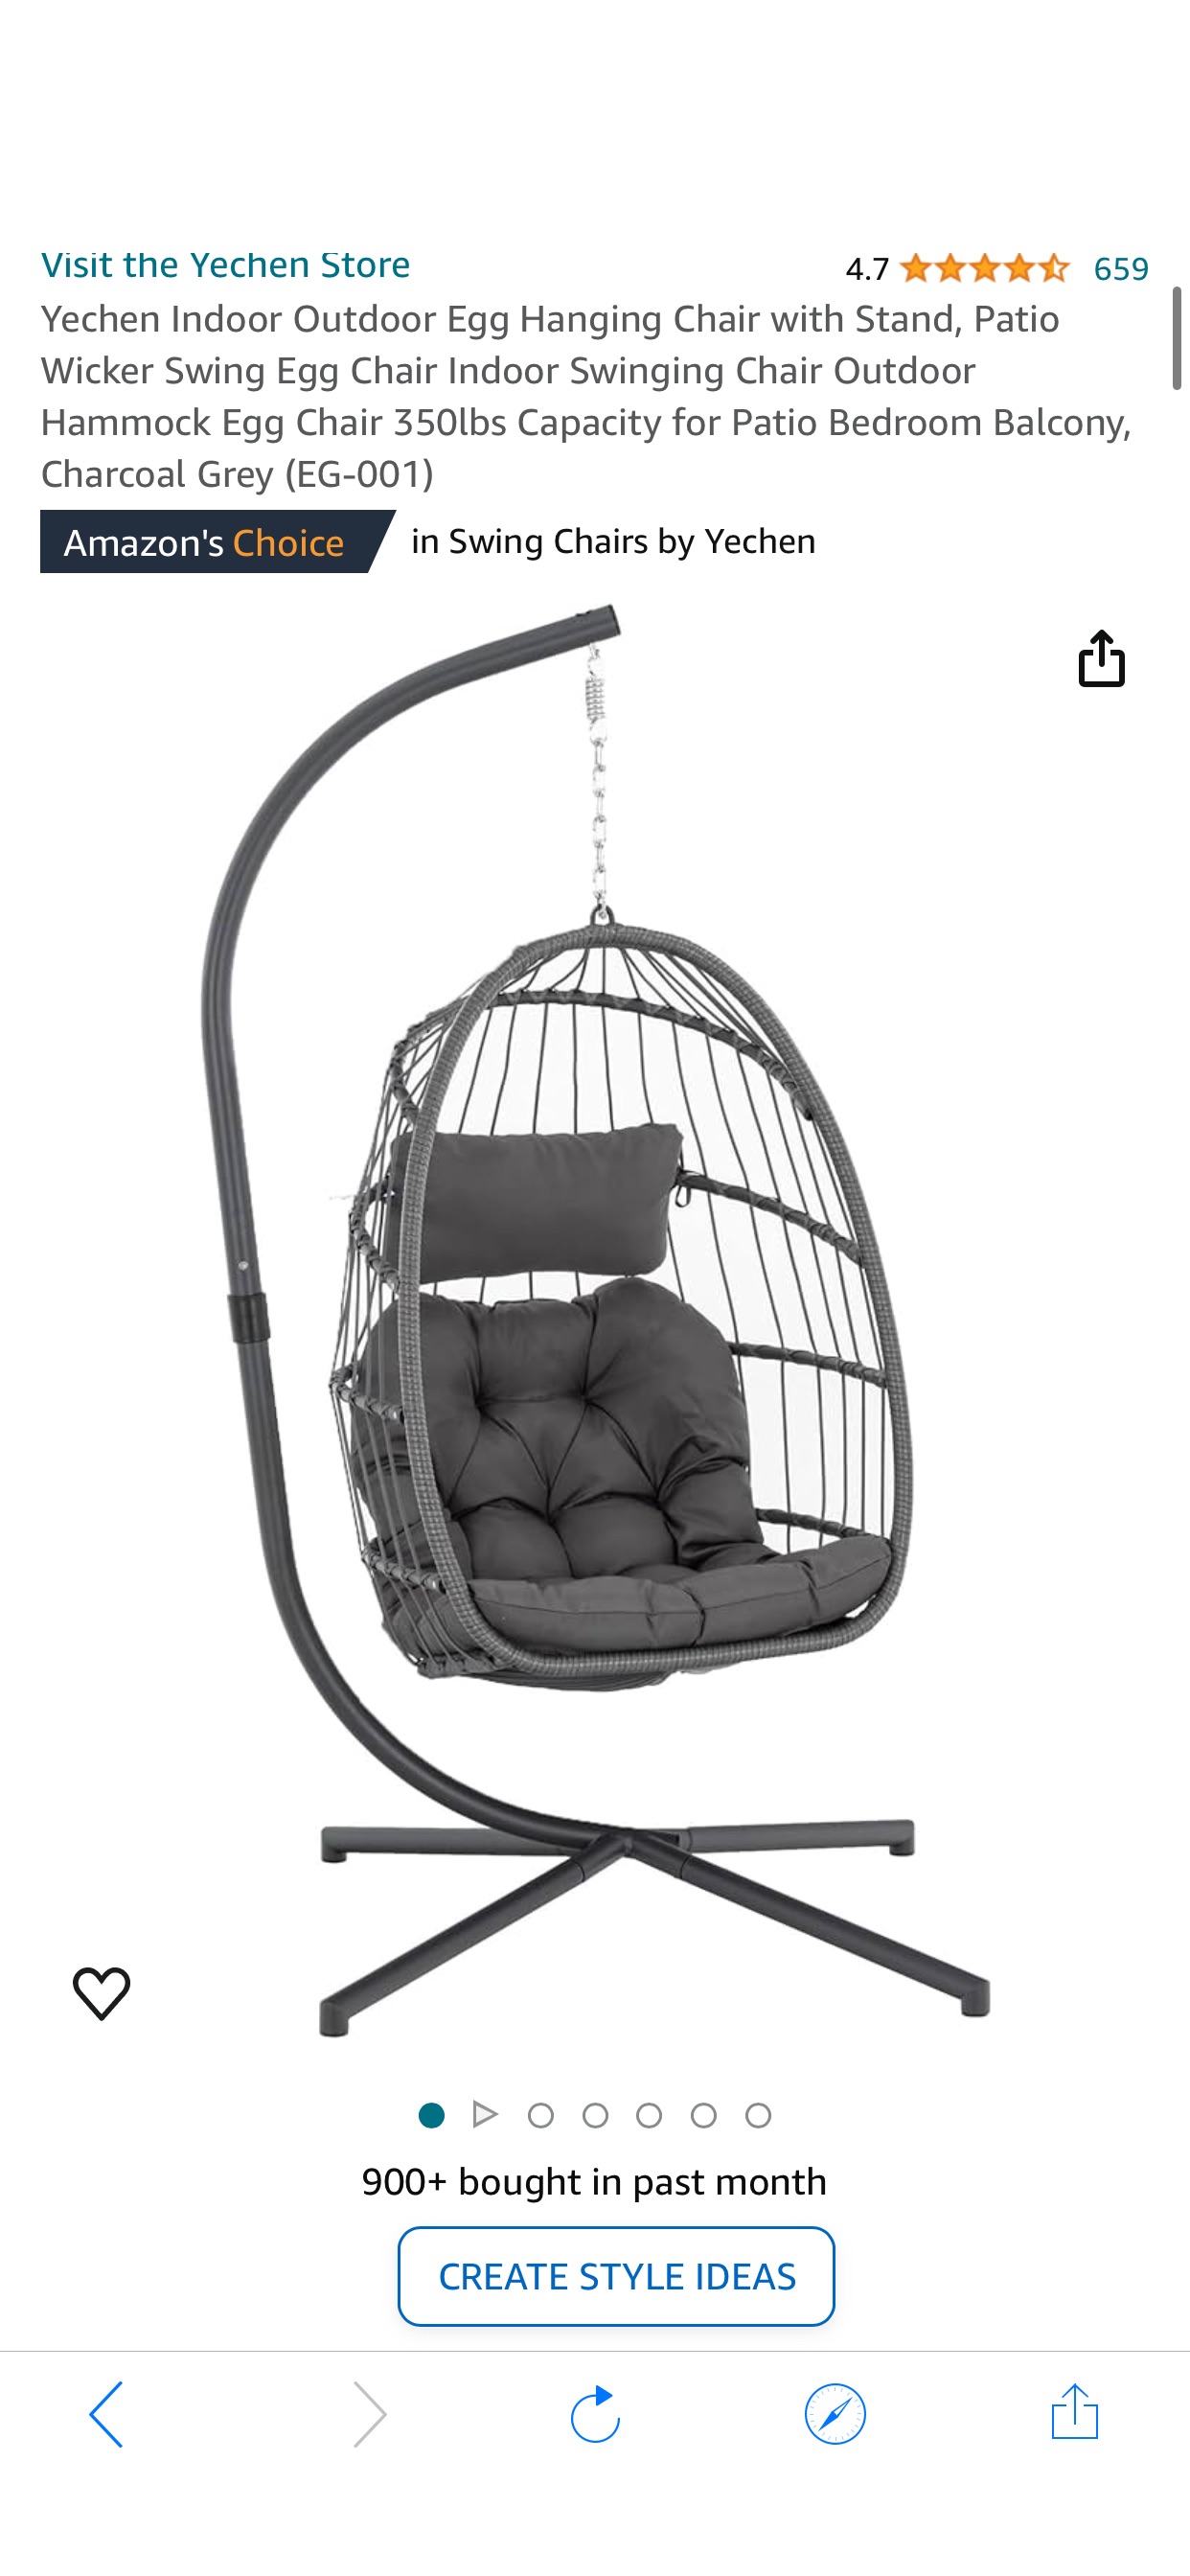 Amazon.com: Yechen Indoor Outdoor Egg Hanging Chair with Stand, Patio Wicker Swing Egg Chair Indoor Swinging Chair Outdoor Hammock Egg Chair 350lbs Capacity for Patio Bedroom Balcony, Charcoal Grey (E